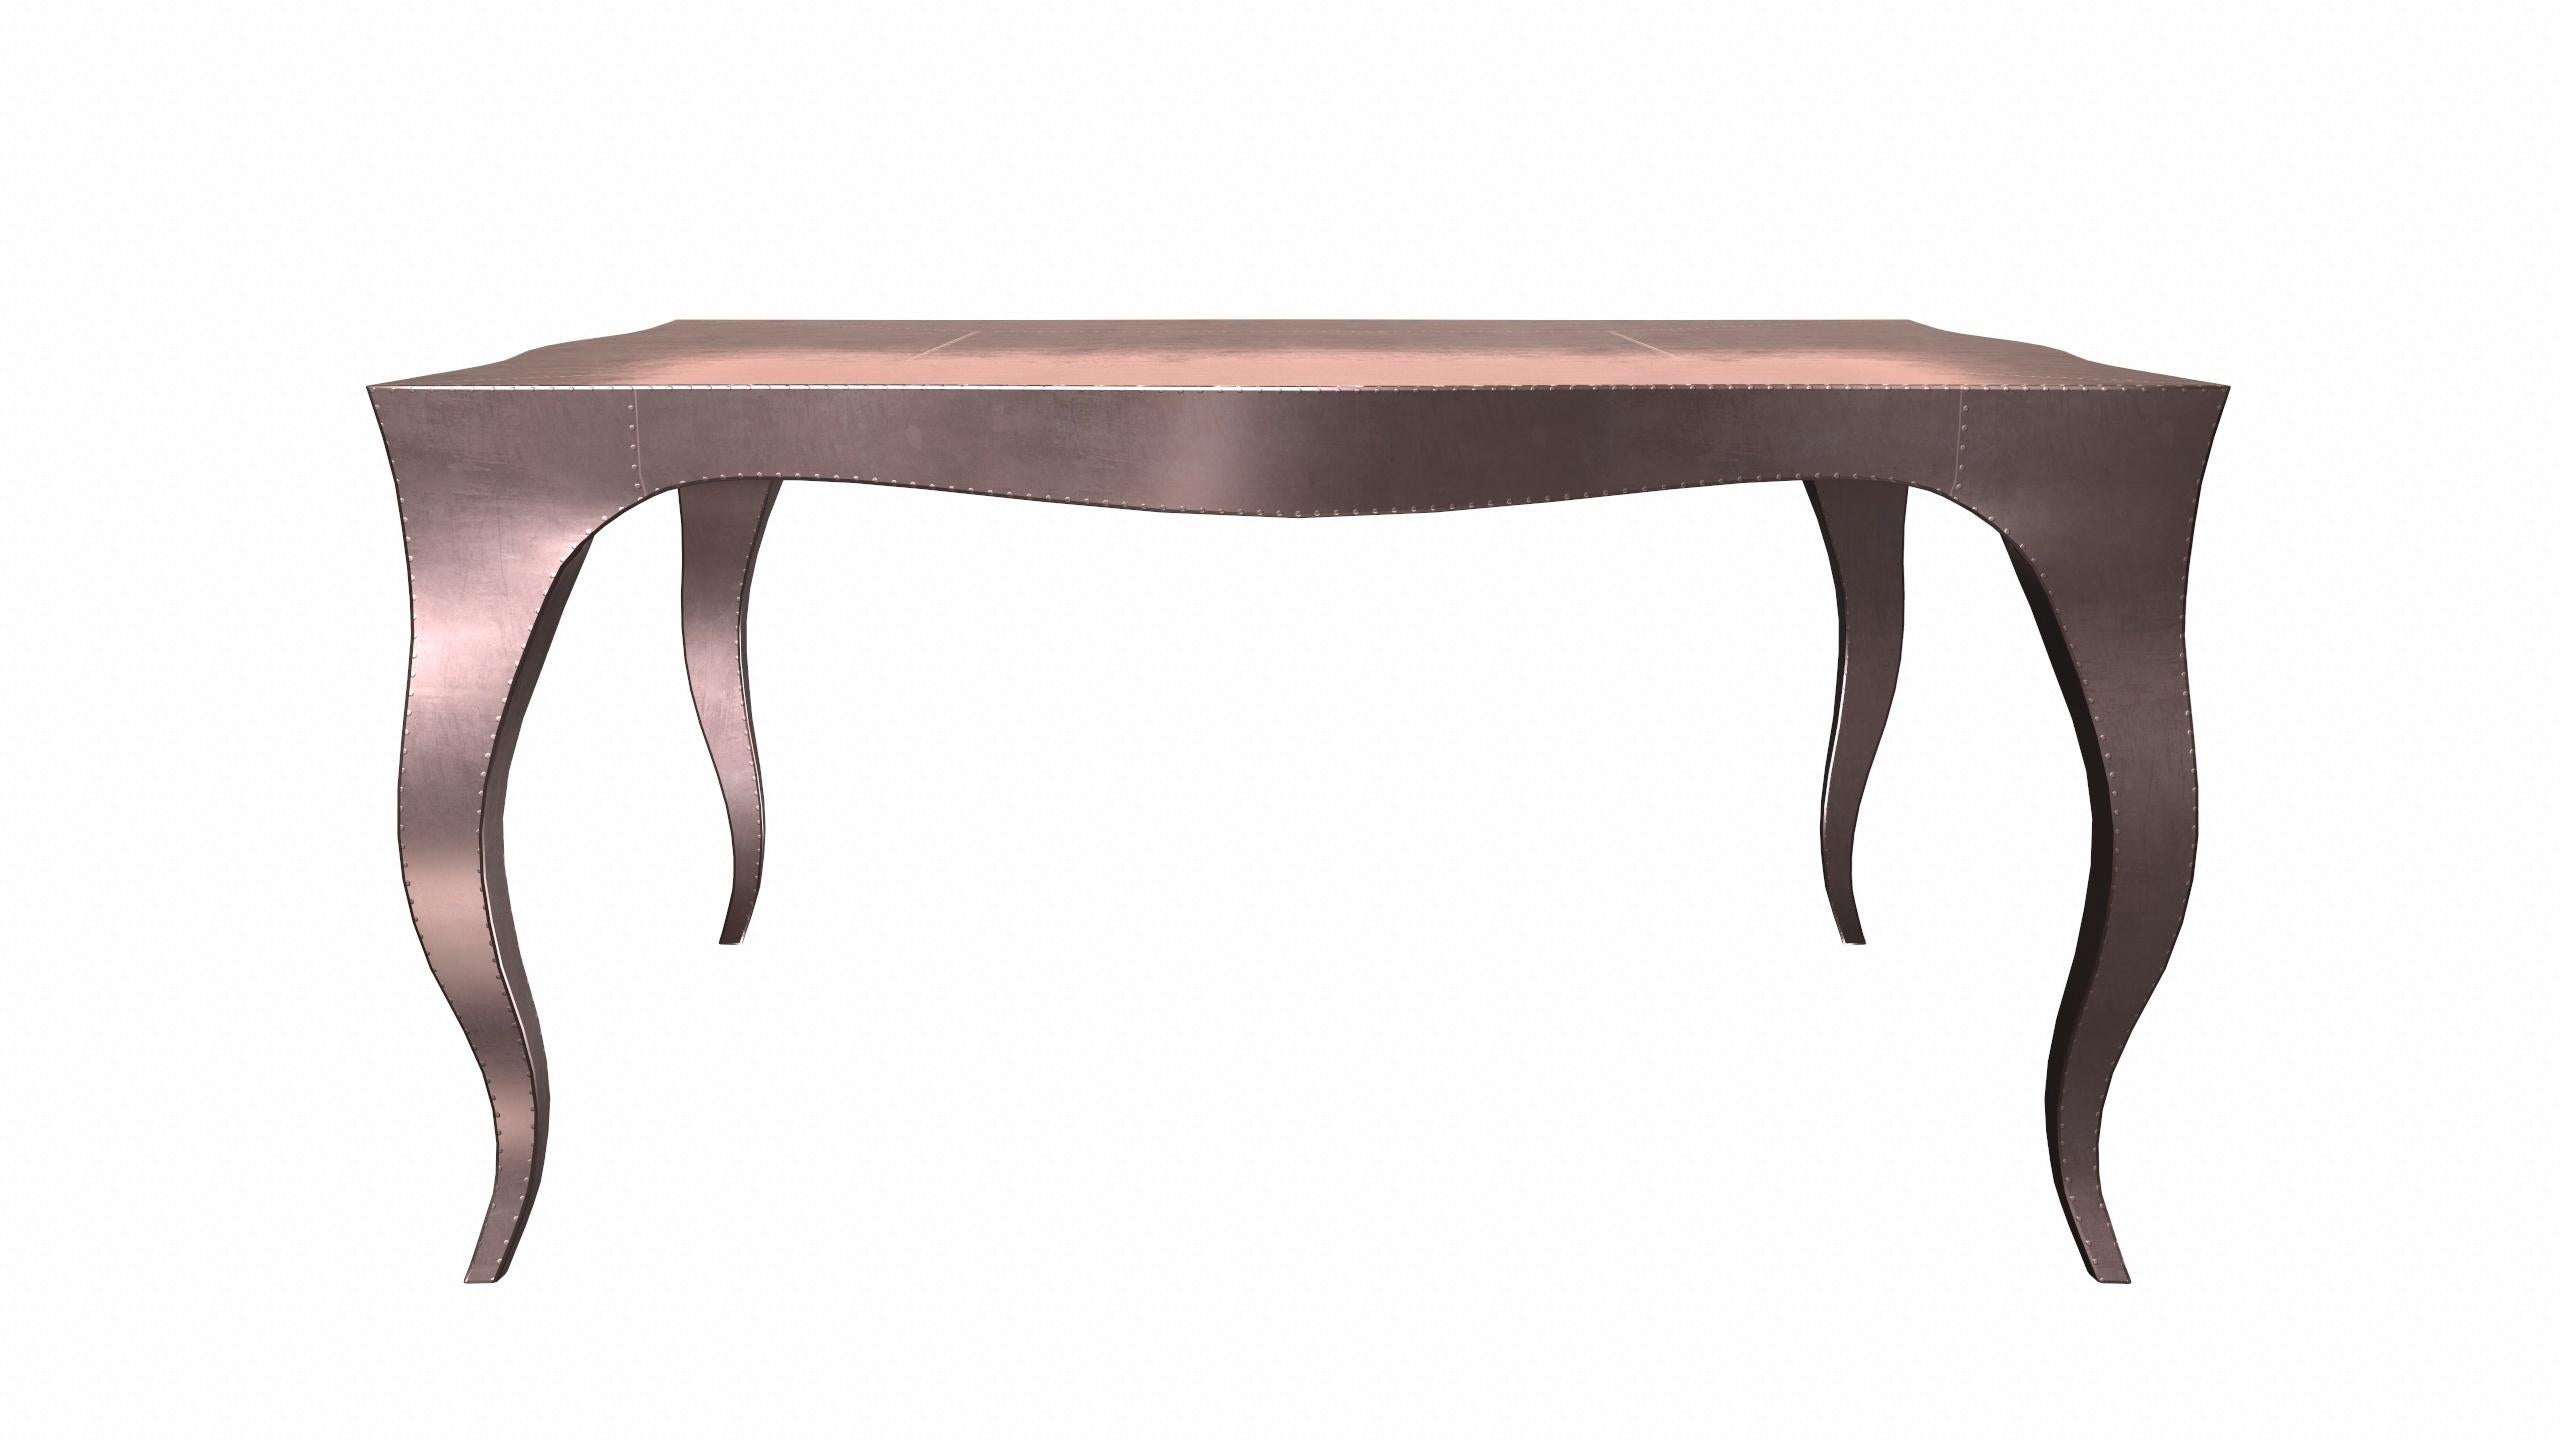 Hand-Carved Louise Art Deco Center Tables Smooth Copper 18.5x18.5x10 inch by Paul Mathieu For Sale